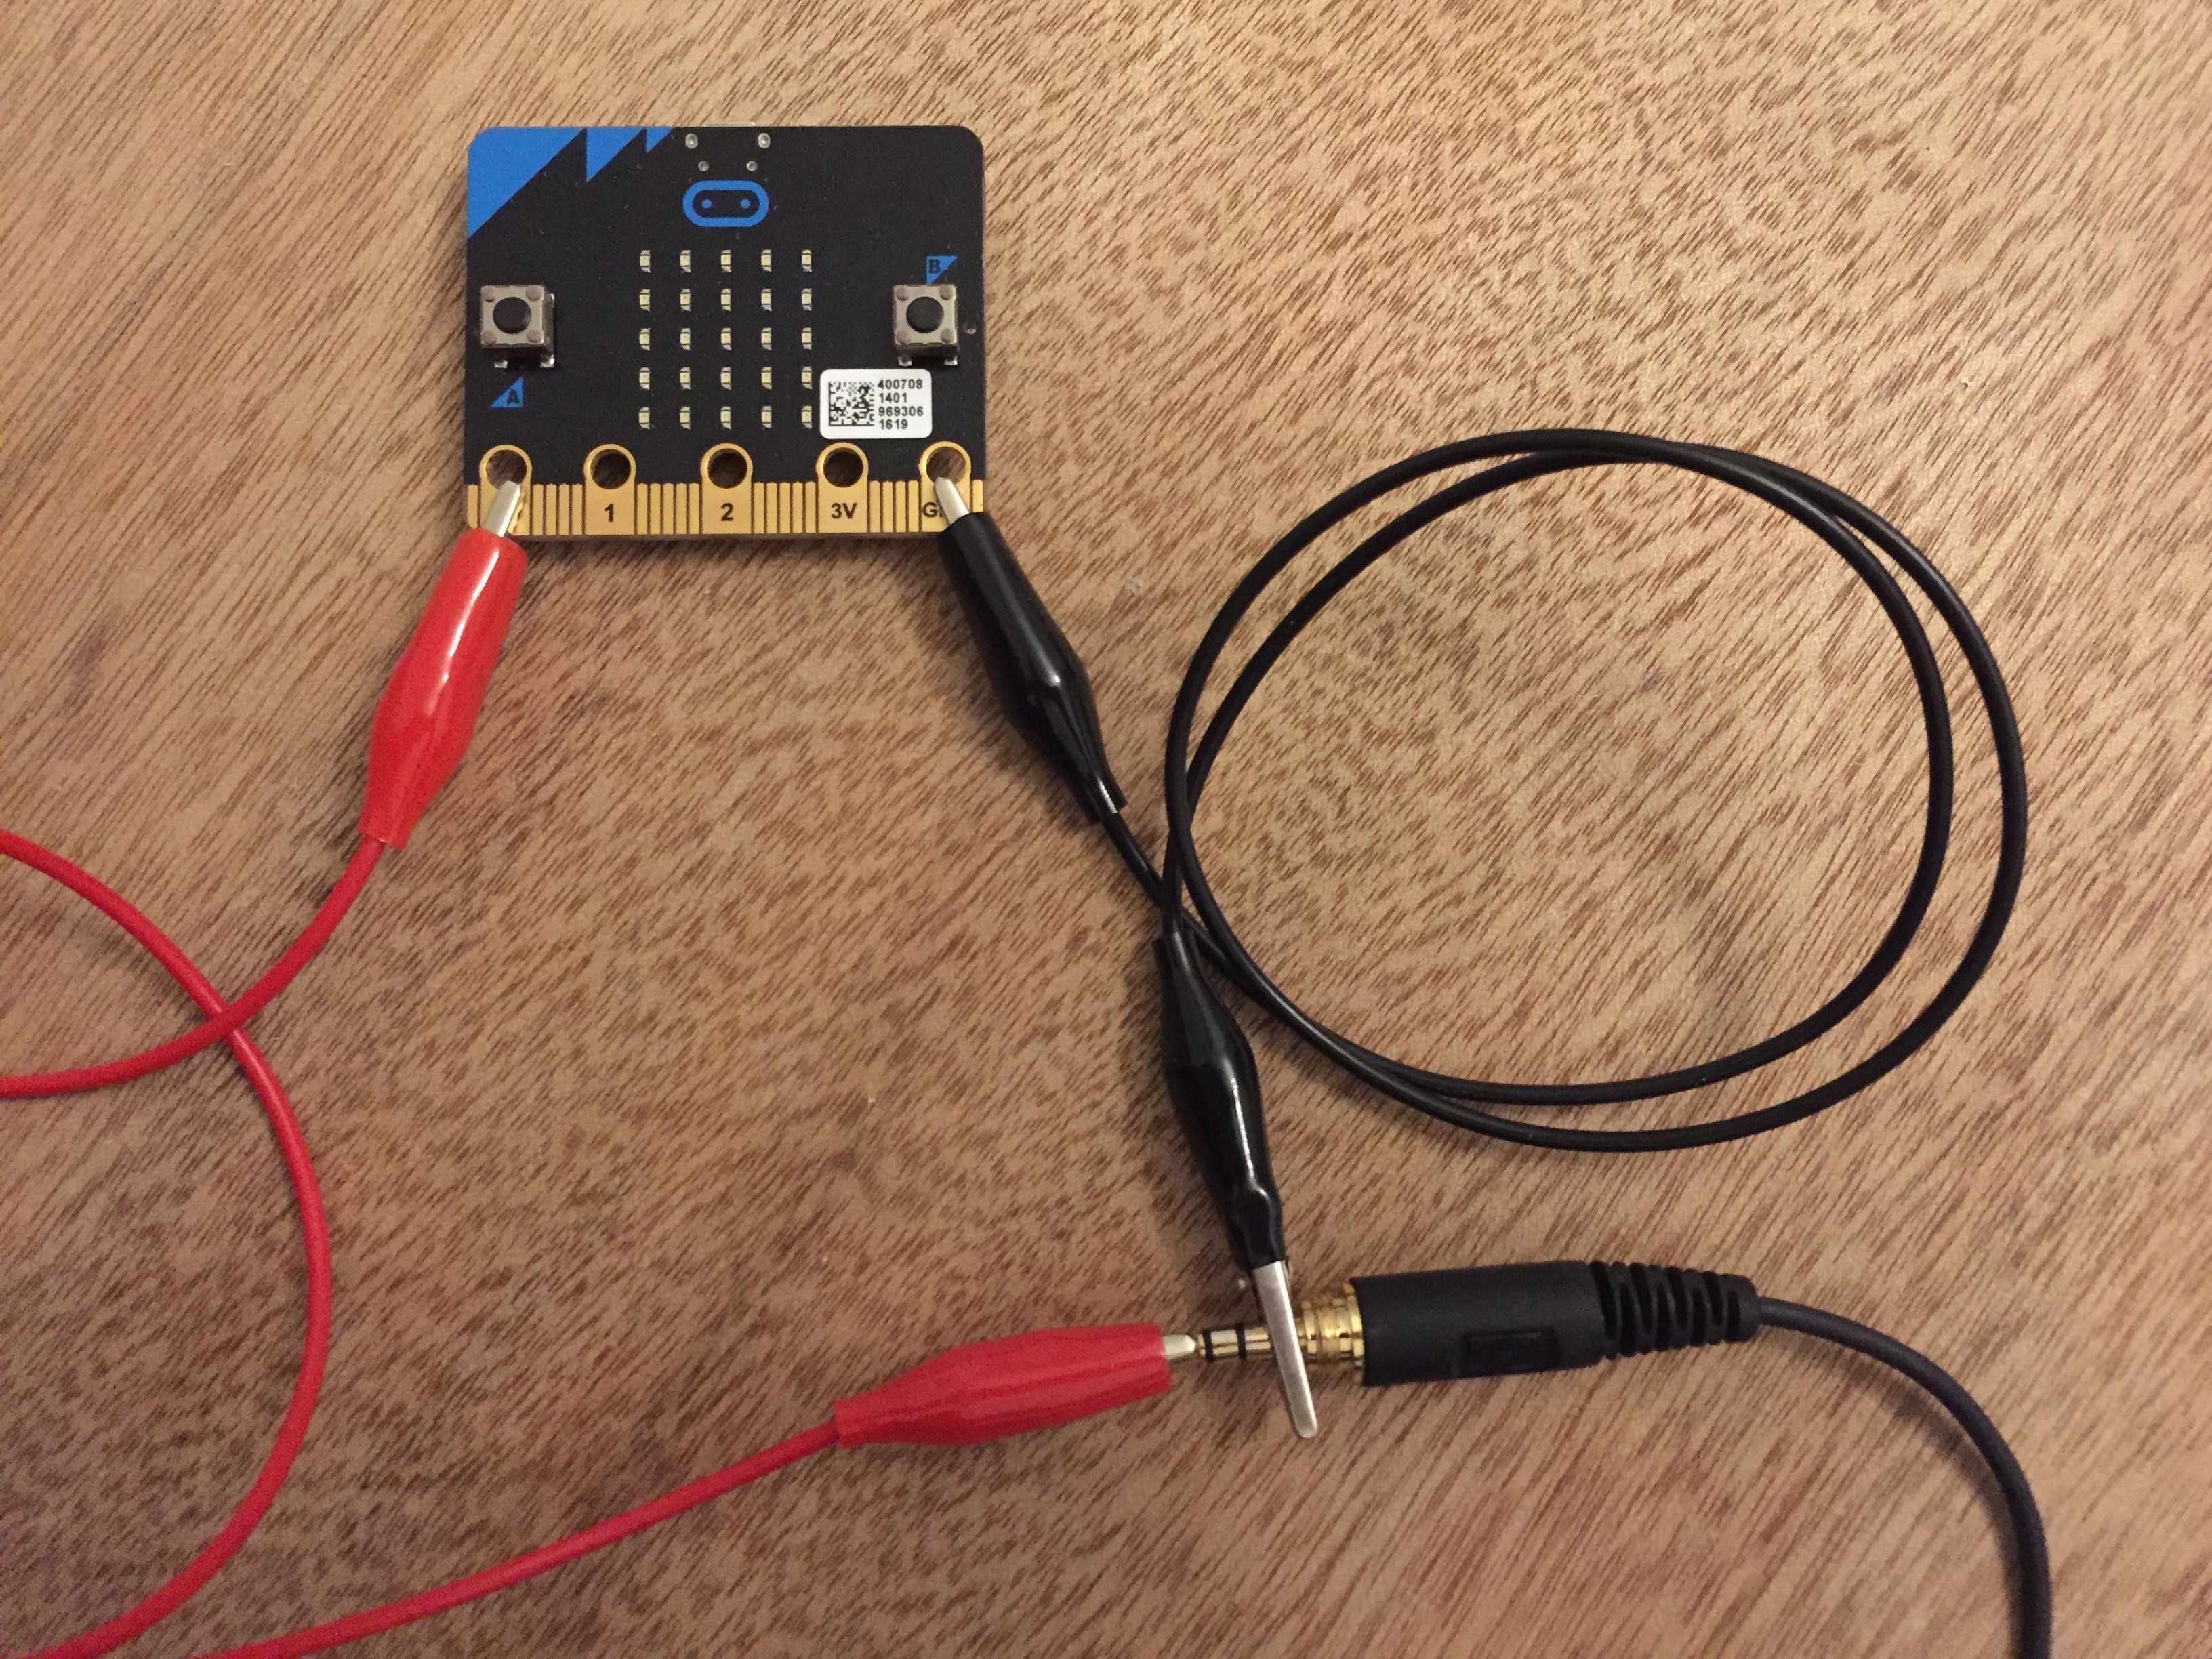 Connecting the leads from the BBC microbit to the audio cable